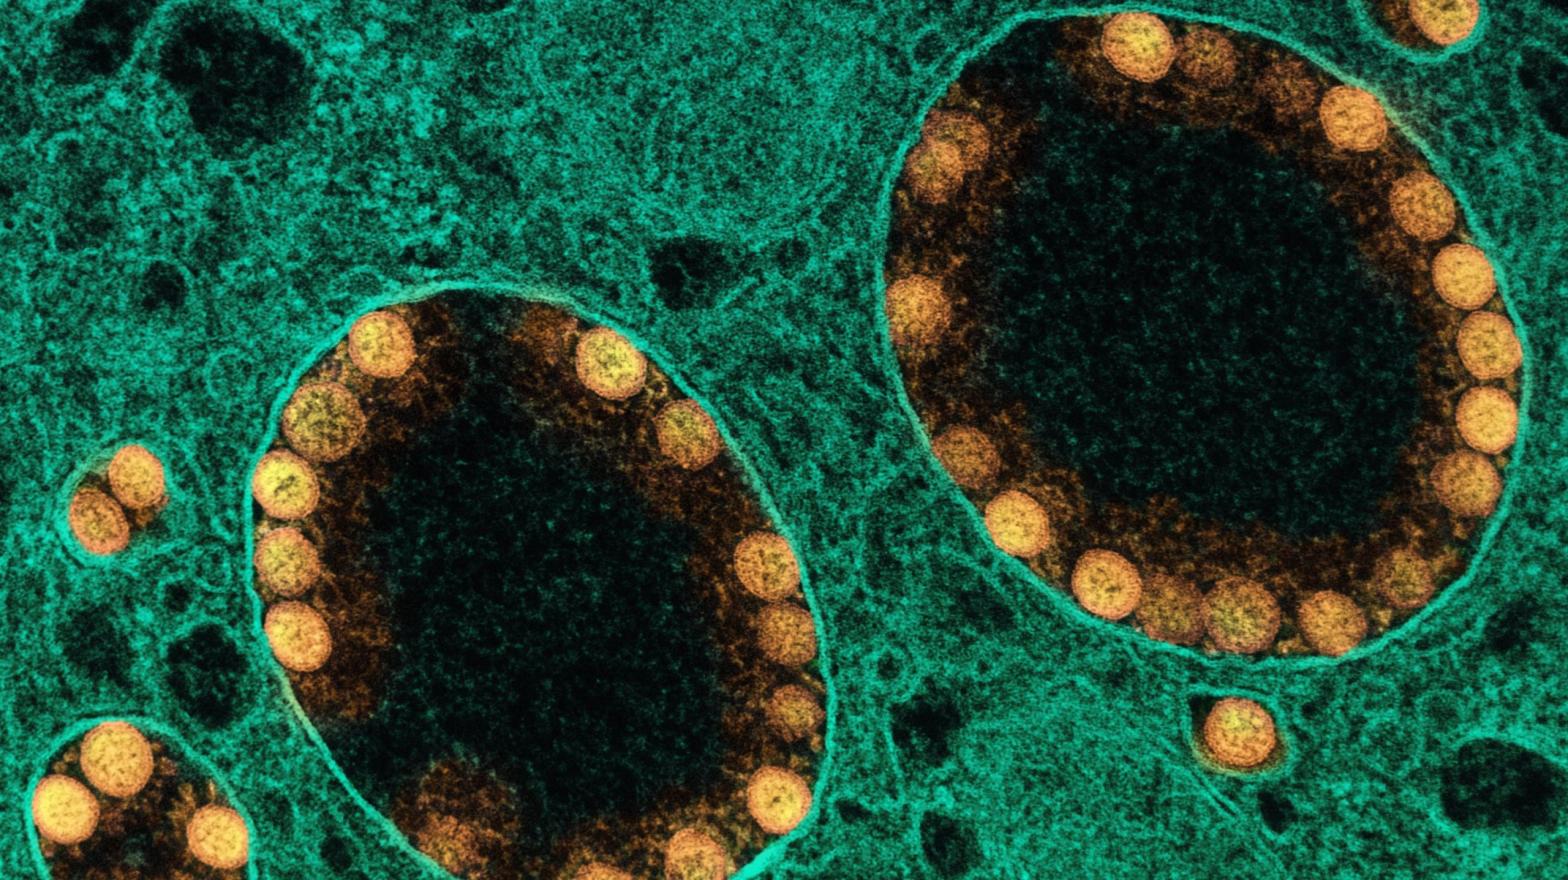 A transmission electron micrograph of SARS-CoV-2 virus particles (in gold) within endosomes of a heavily infected nasal olfactory epithelial cell. (Photo: NIH/NAID/IMAGE.FR/BSIP/Universal Images Group, Getty Images)